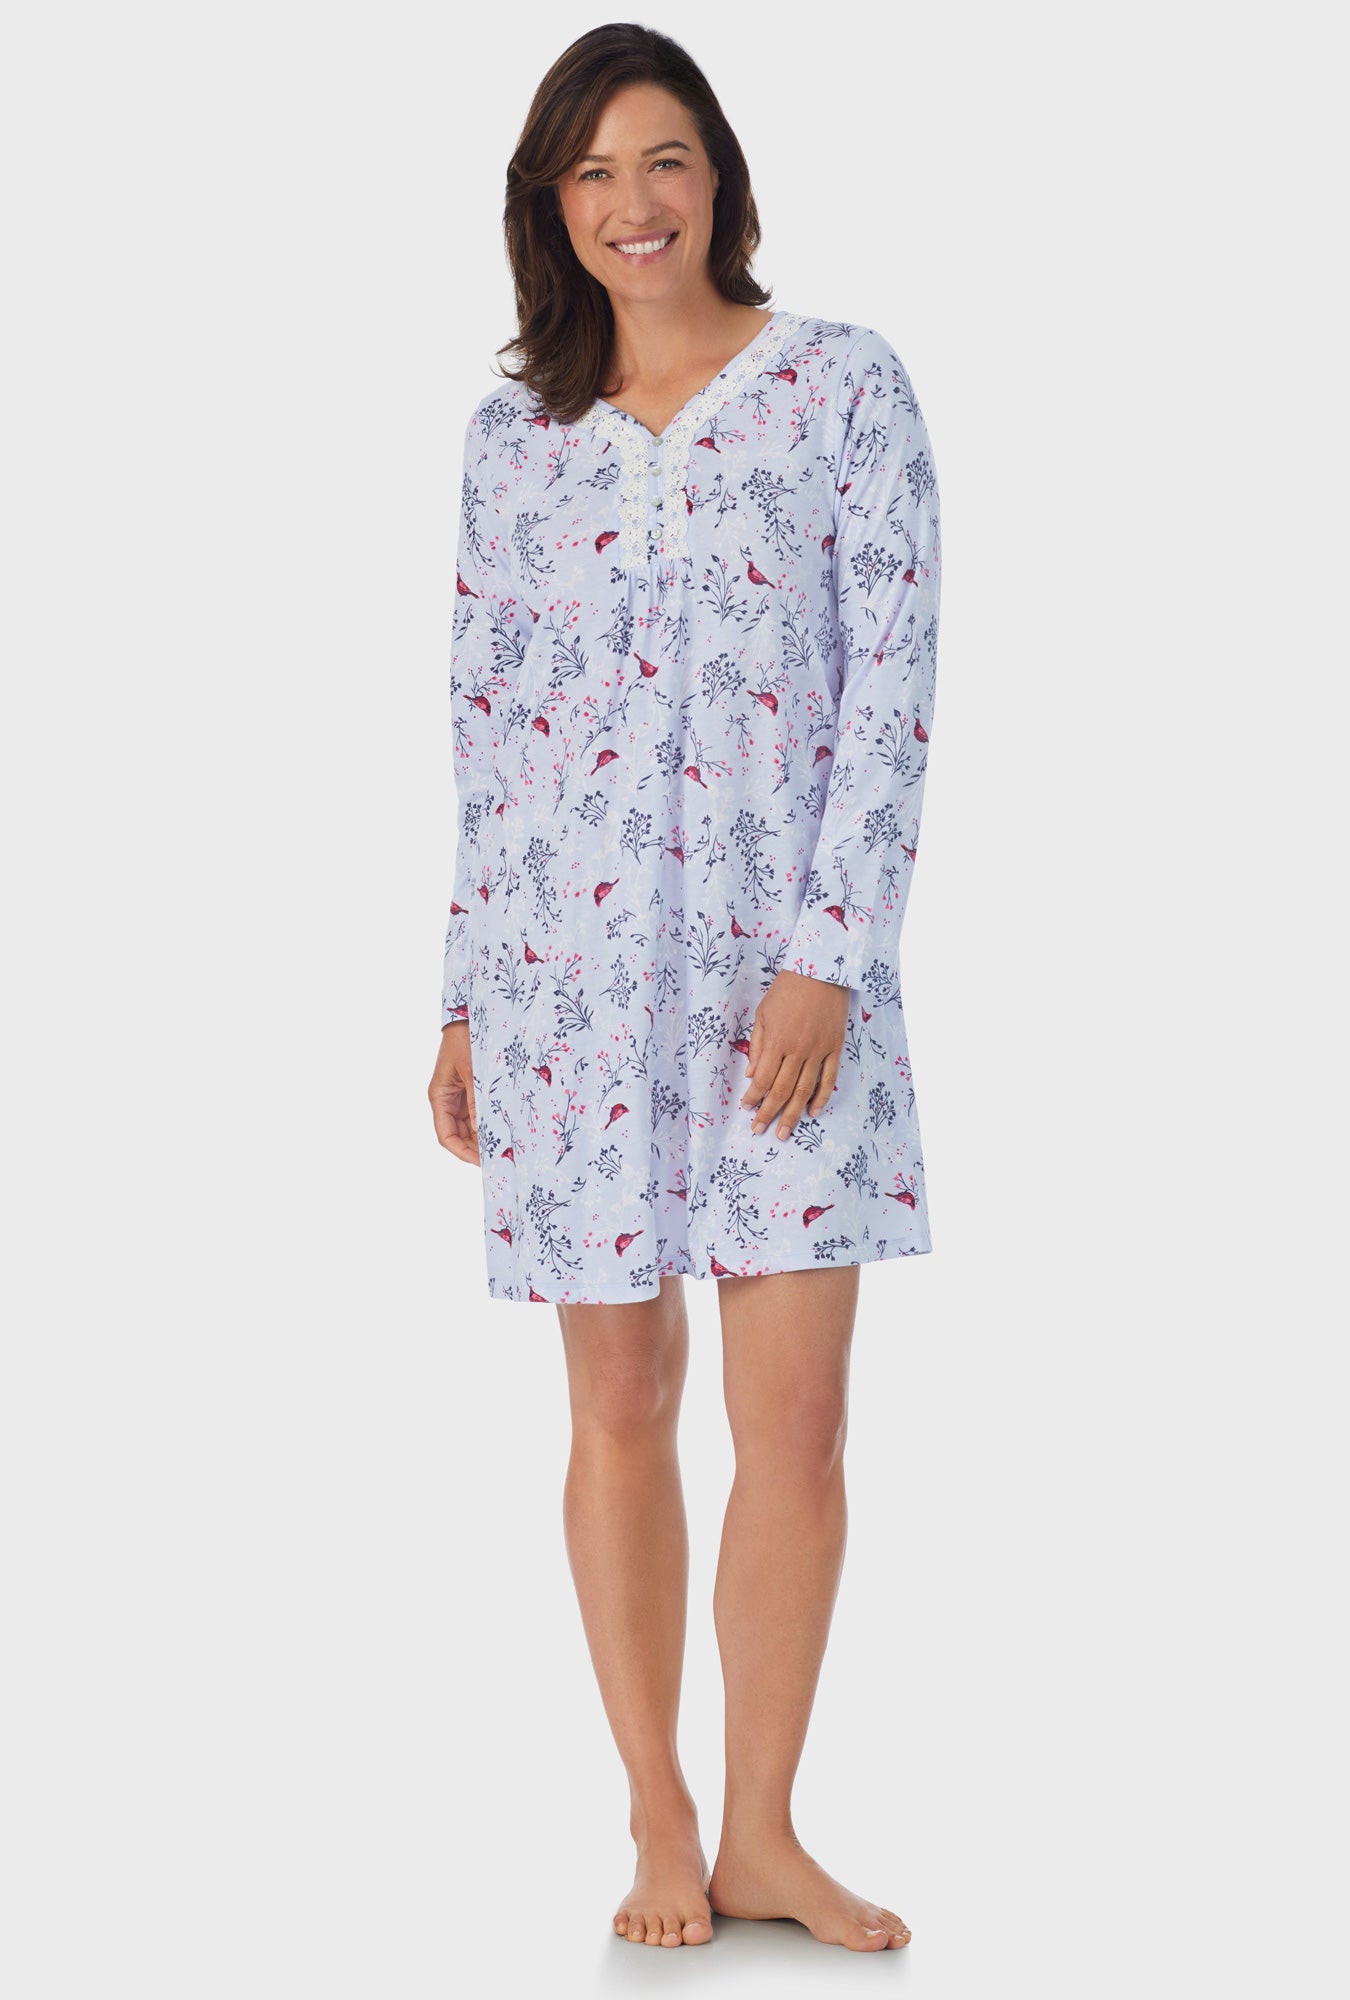 Cotton Nightgowns for Women Long Sleeves Sleep Gown Full Length Nightdress  with Pockets (Lilac Rose, S) at  Women's Clothing store